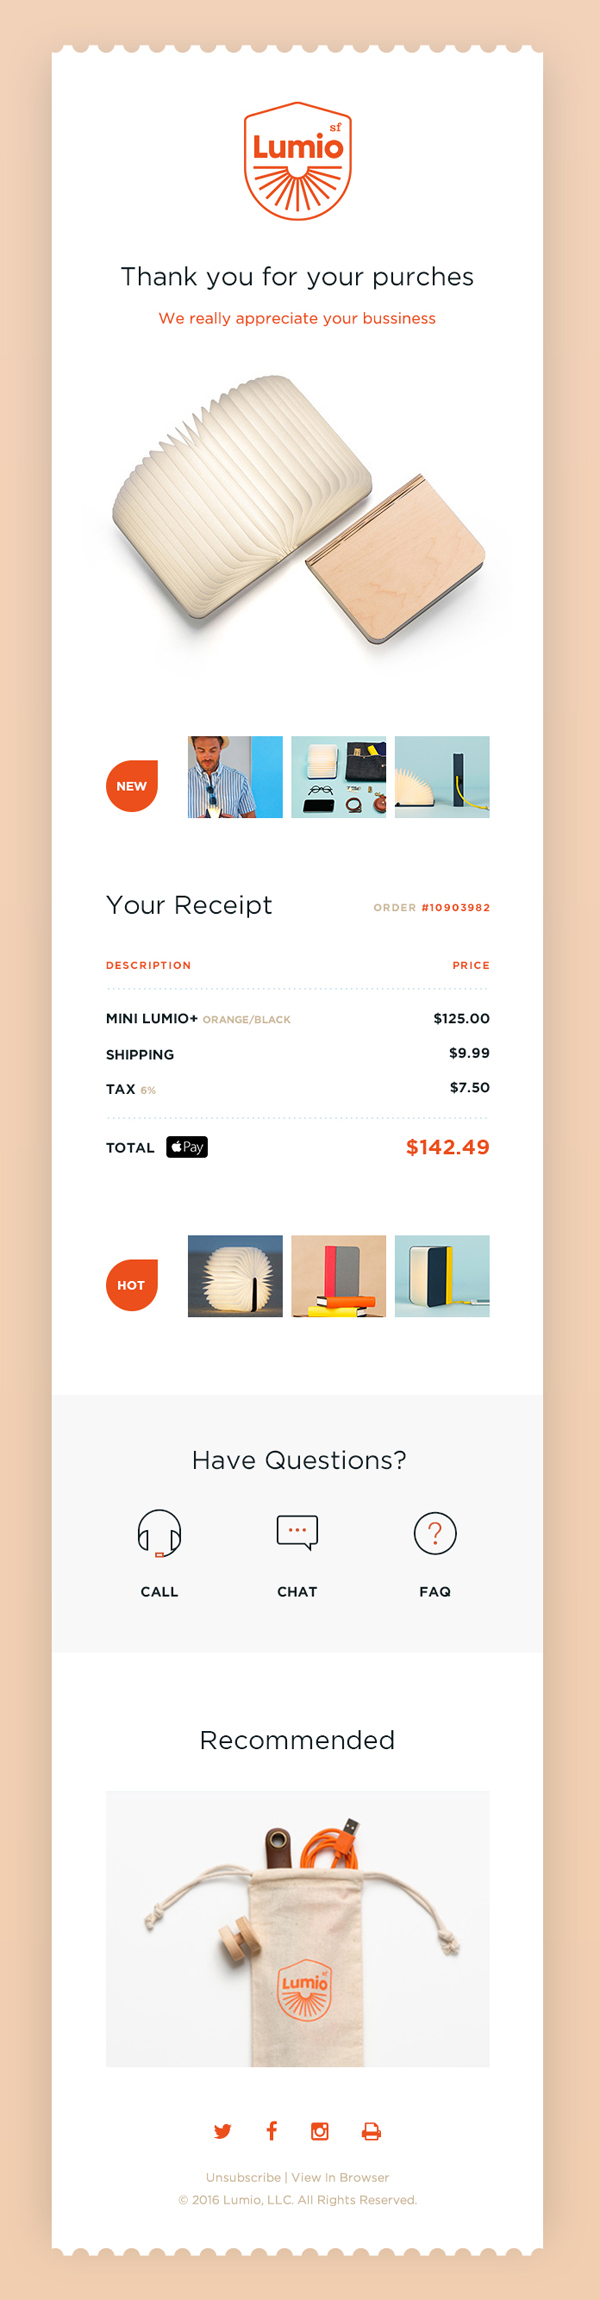 Free Email Receipt PSD UI Template